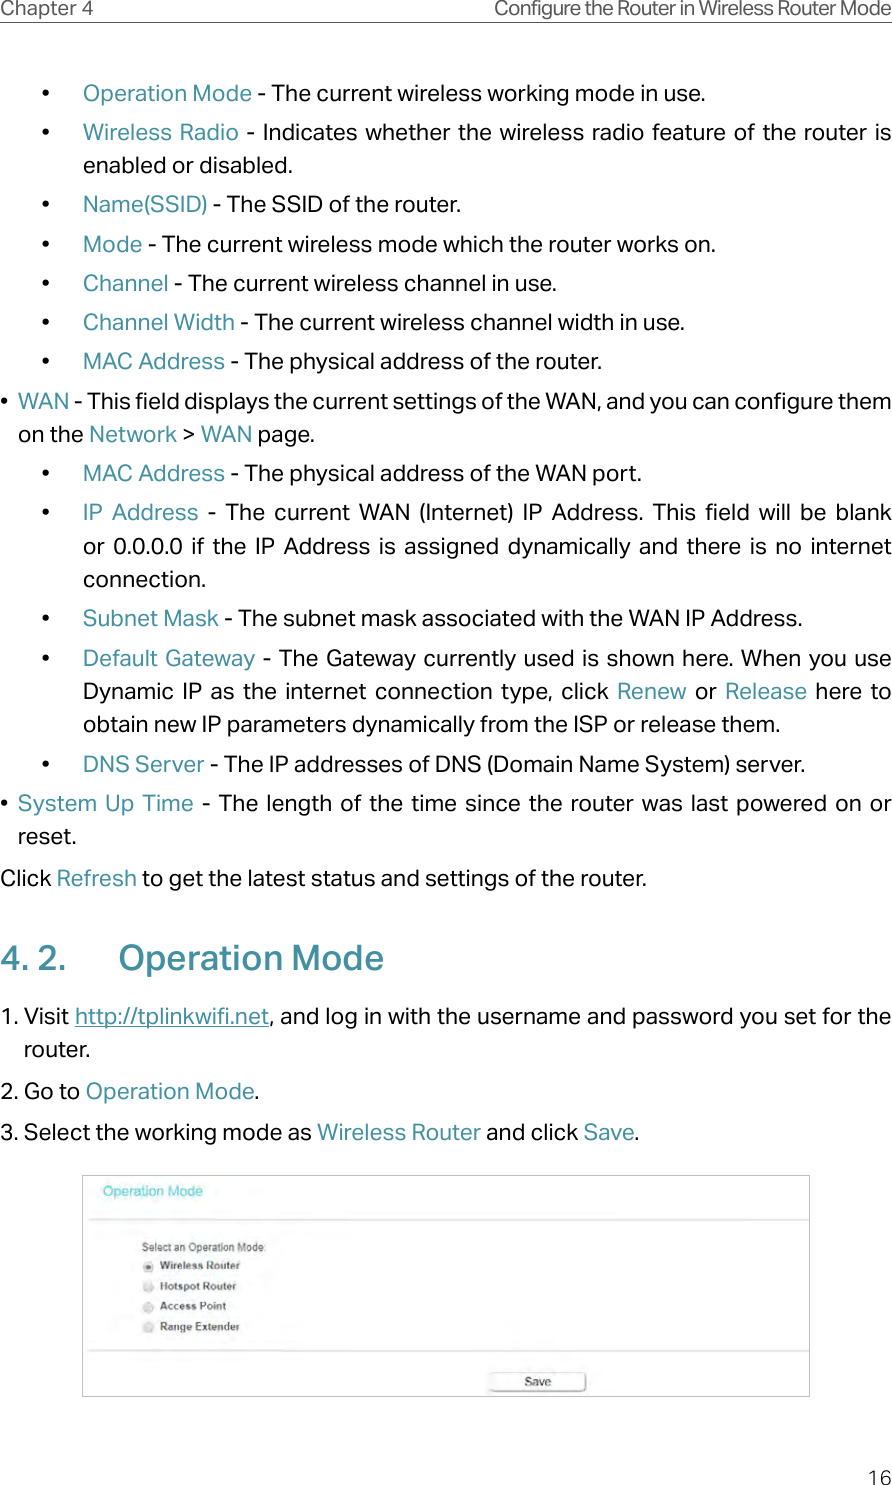 16Chapter 4 Configure the Router in Wireless Router Mode•  Operation Mode - The current wireless working mode in use.•  Wireless Radio - Indicates whether the wireless radio feature of the router is enabled or disabled.•  Name(SSID) - The SSID of the router.•  Mode - The current wireless mode which the router works on.•  Channel - The current wireless channel in use.•  Channel Width - The current wireless channel width in use.•  MAC Address - The physical address of the router.•  WAN - This field displays the current settings of the WAN, and you can configure them on the Network &gt; WAN page.•  MAC Address - The physical address of the WAN port.•  IP Address - The current WAN (Internet) IP Address. This field will be blank or 0.0.0.0 if the IP Address is assigned dynamically and there is no internet connection.•  Subnet Mask - The subnet mask associated with the WAN IP Address.•  Default Gateway - The Gateway currently used is shown here. When you use Dynamic IP as the internet connection type, click Renew  or  Release here to obtain new IP parameters dynamically from the ISP or release them.•  DNS Server - The IP addresses of DNS (Domain Name System) server.•  System Up Time - The length of the time since the router was last powered on or reset.Click Refresh to get the latest status and settings of the router.4. 2.  Operation Mode1. Visit http://tplinkwifi.net, and log in with the username and password you set for the router.2. Go to Operation Mode. 3. Select the working mode as Wireless Router and click Save.